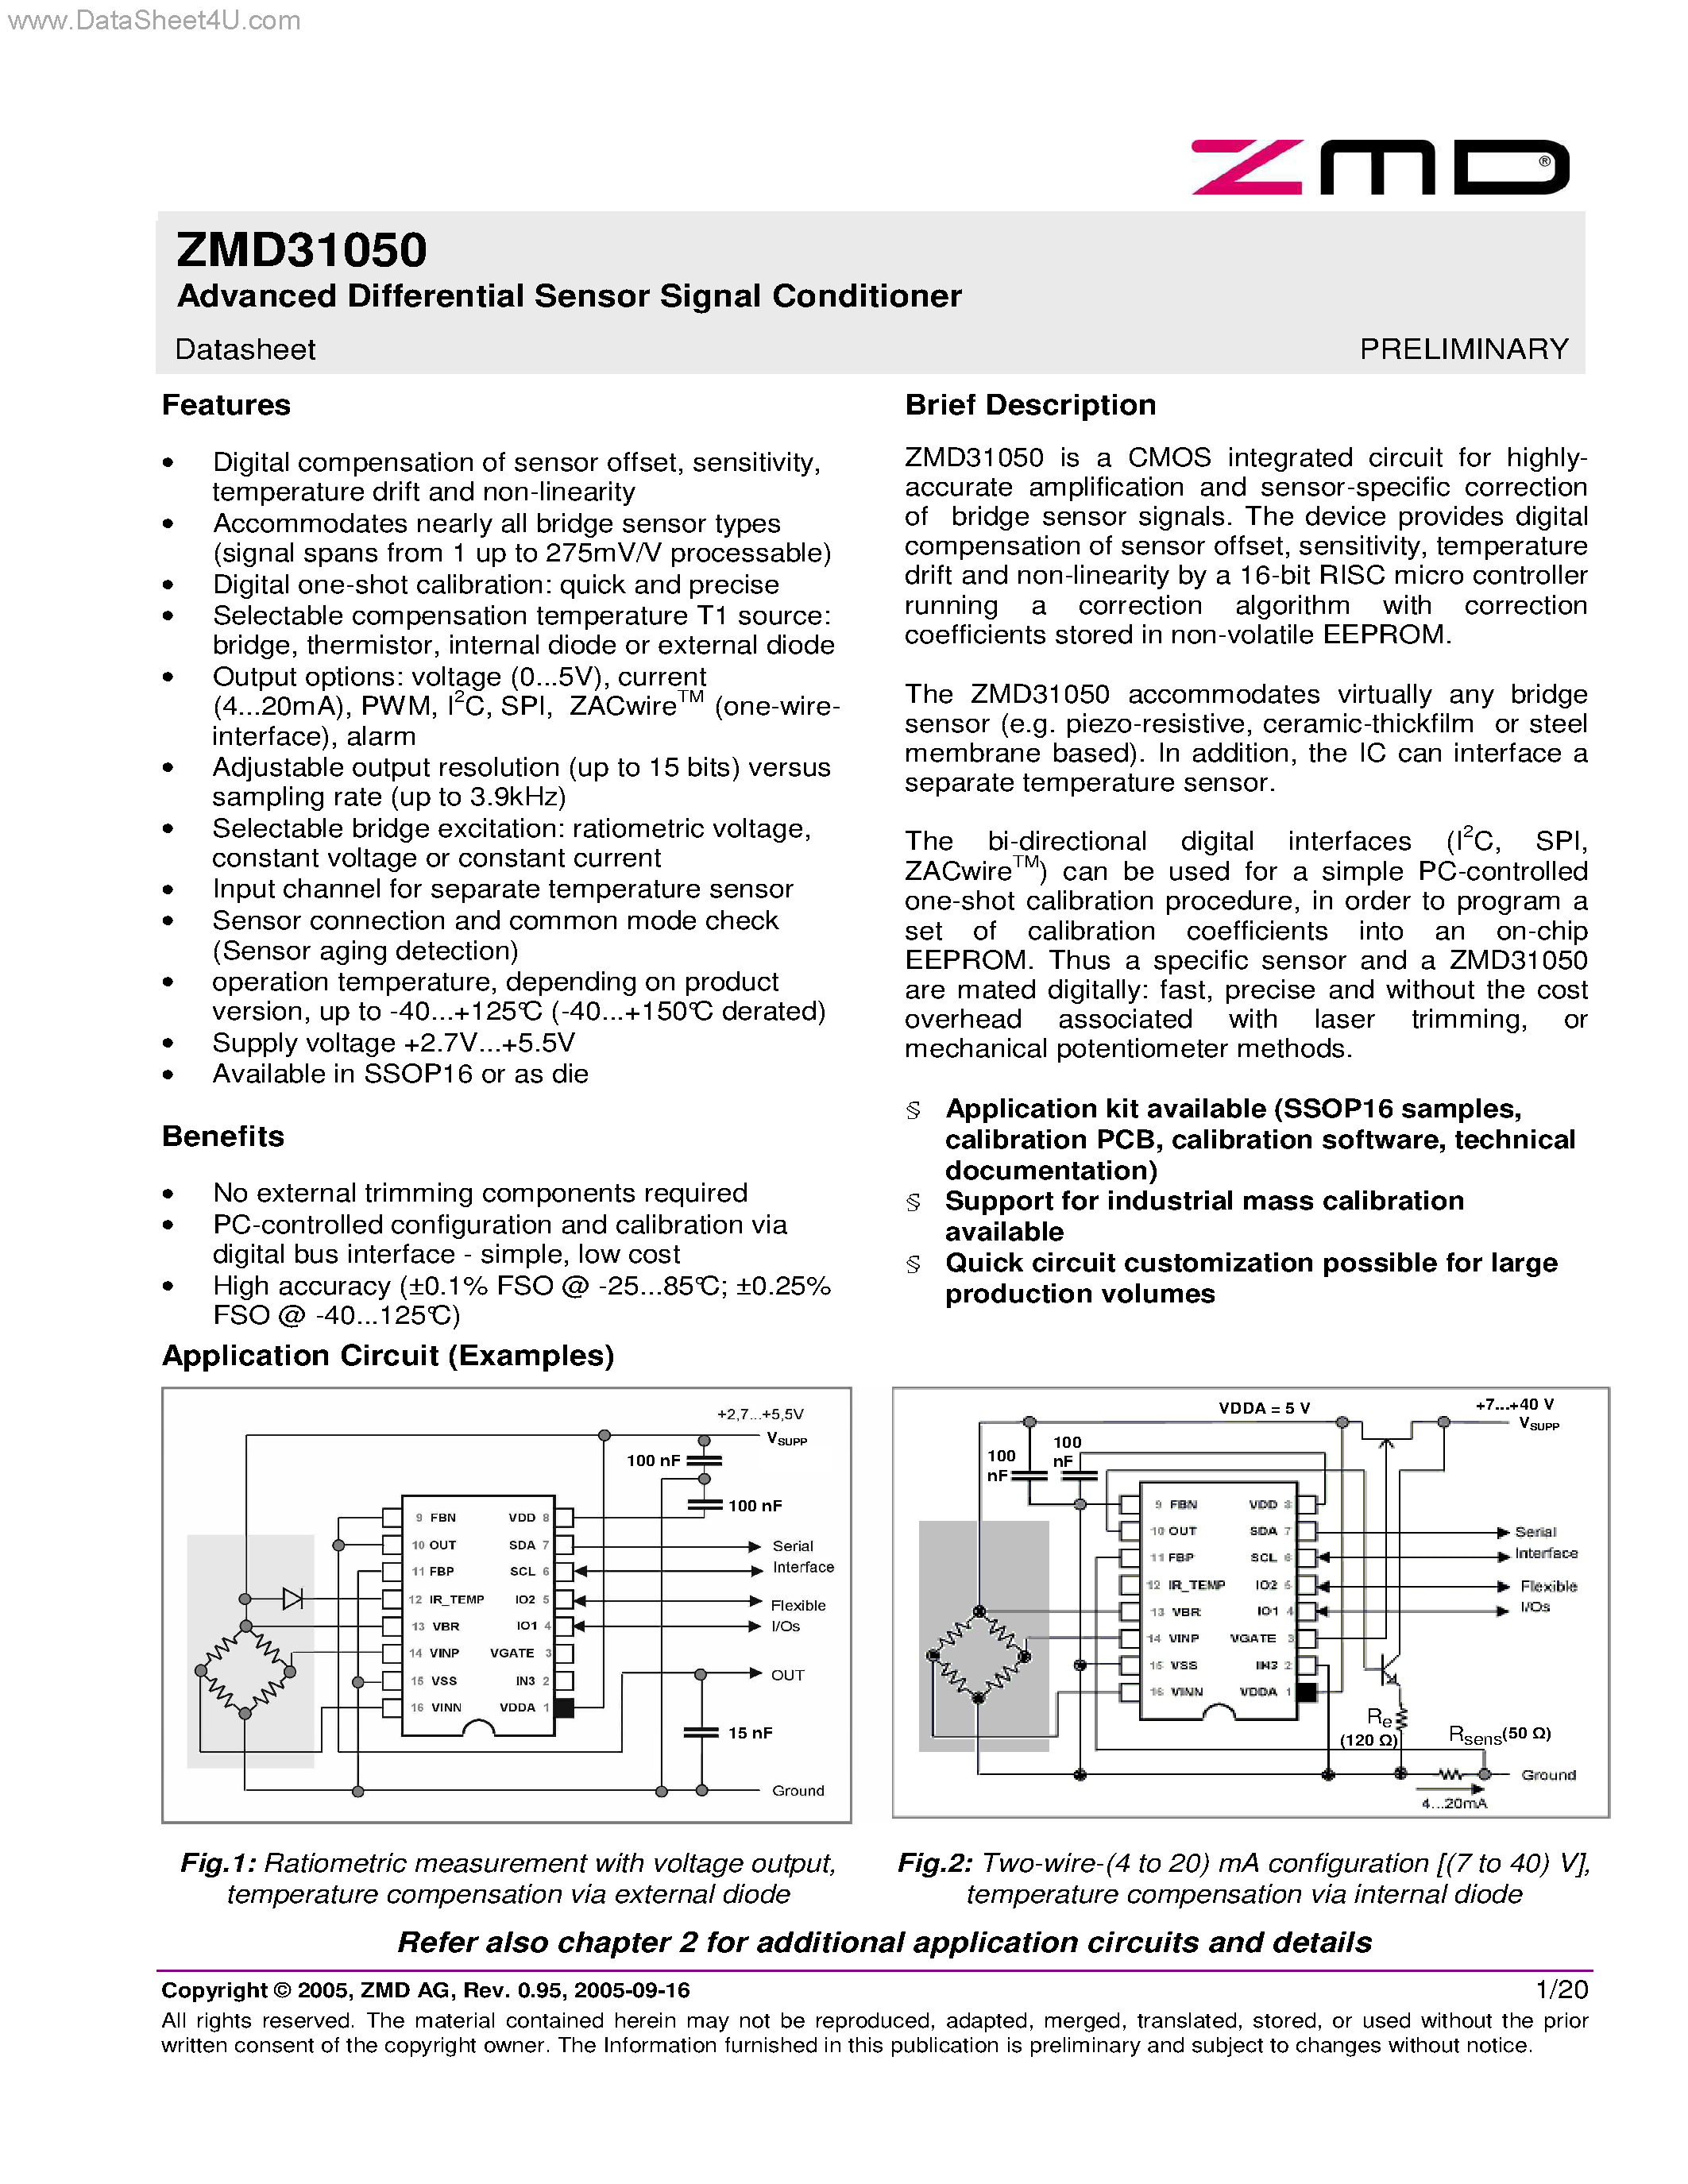 Datasheet ZMD31050 - Advanced Differential Sensor Signal Conditioner page 1